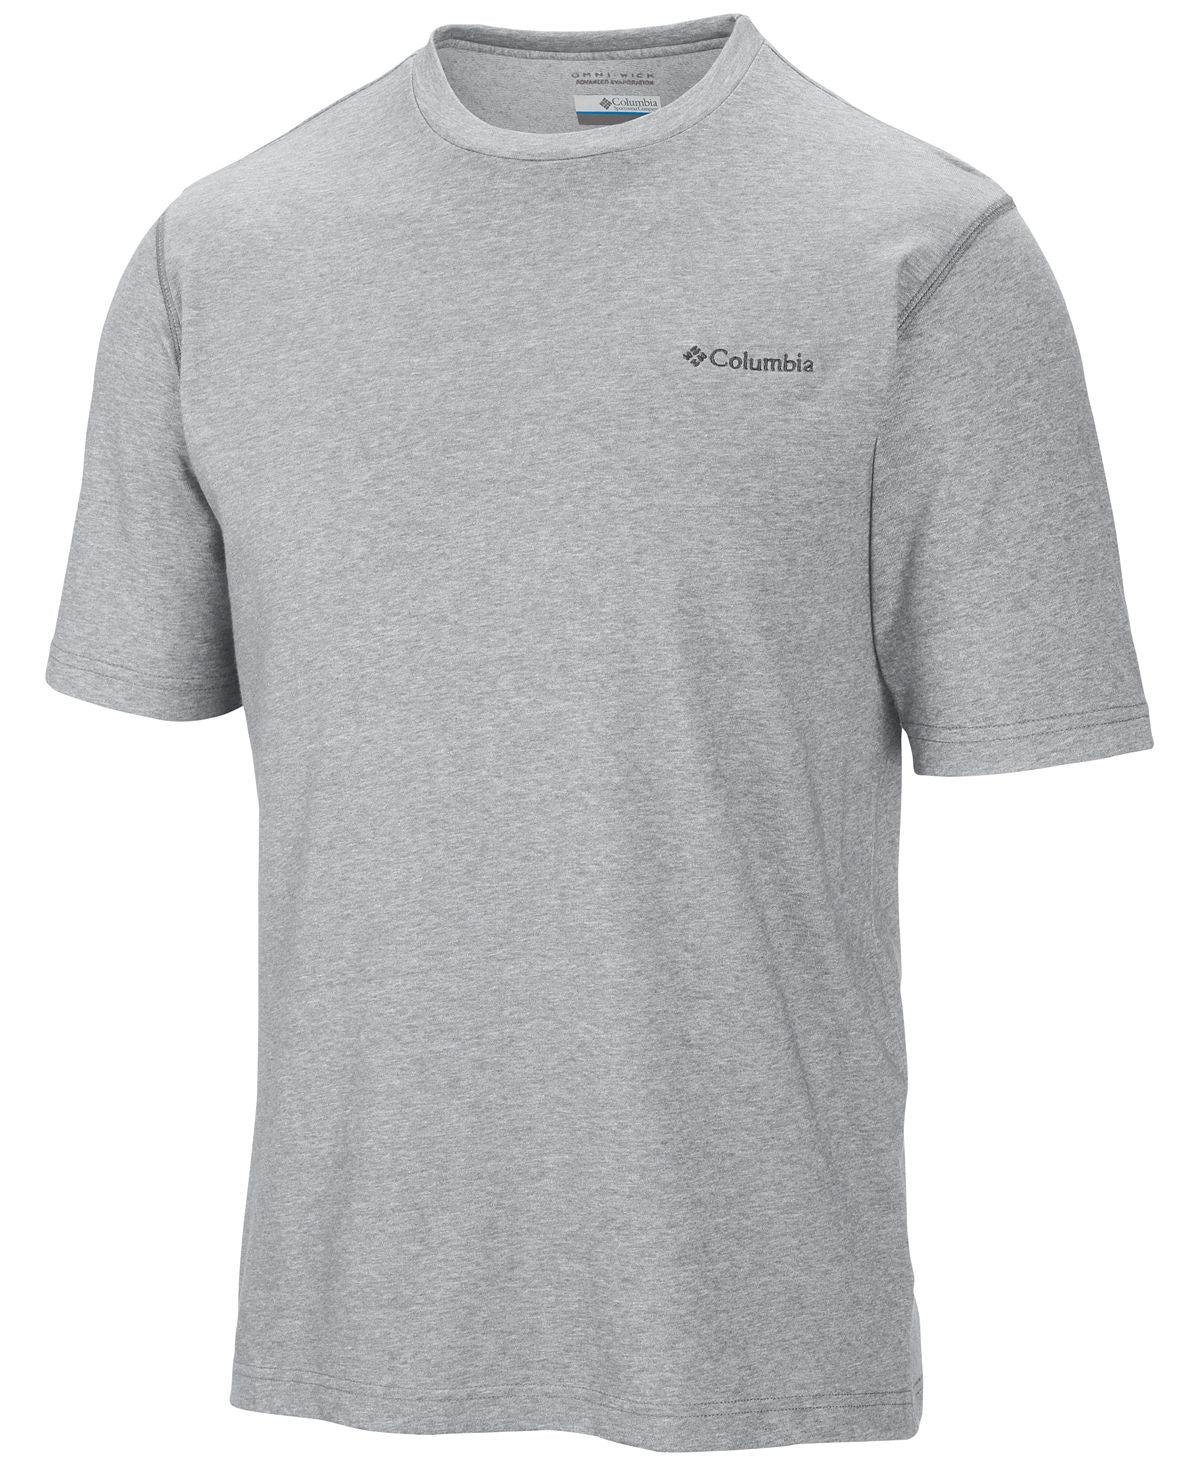 Columbia Thistletown Technical T-shirt Cool Grey